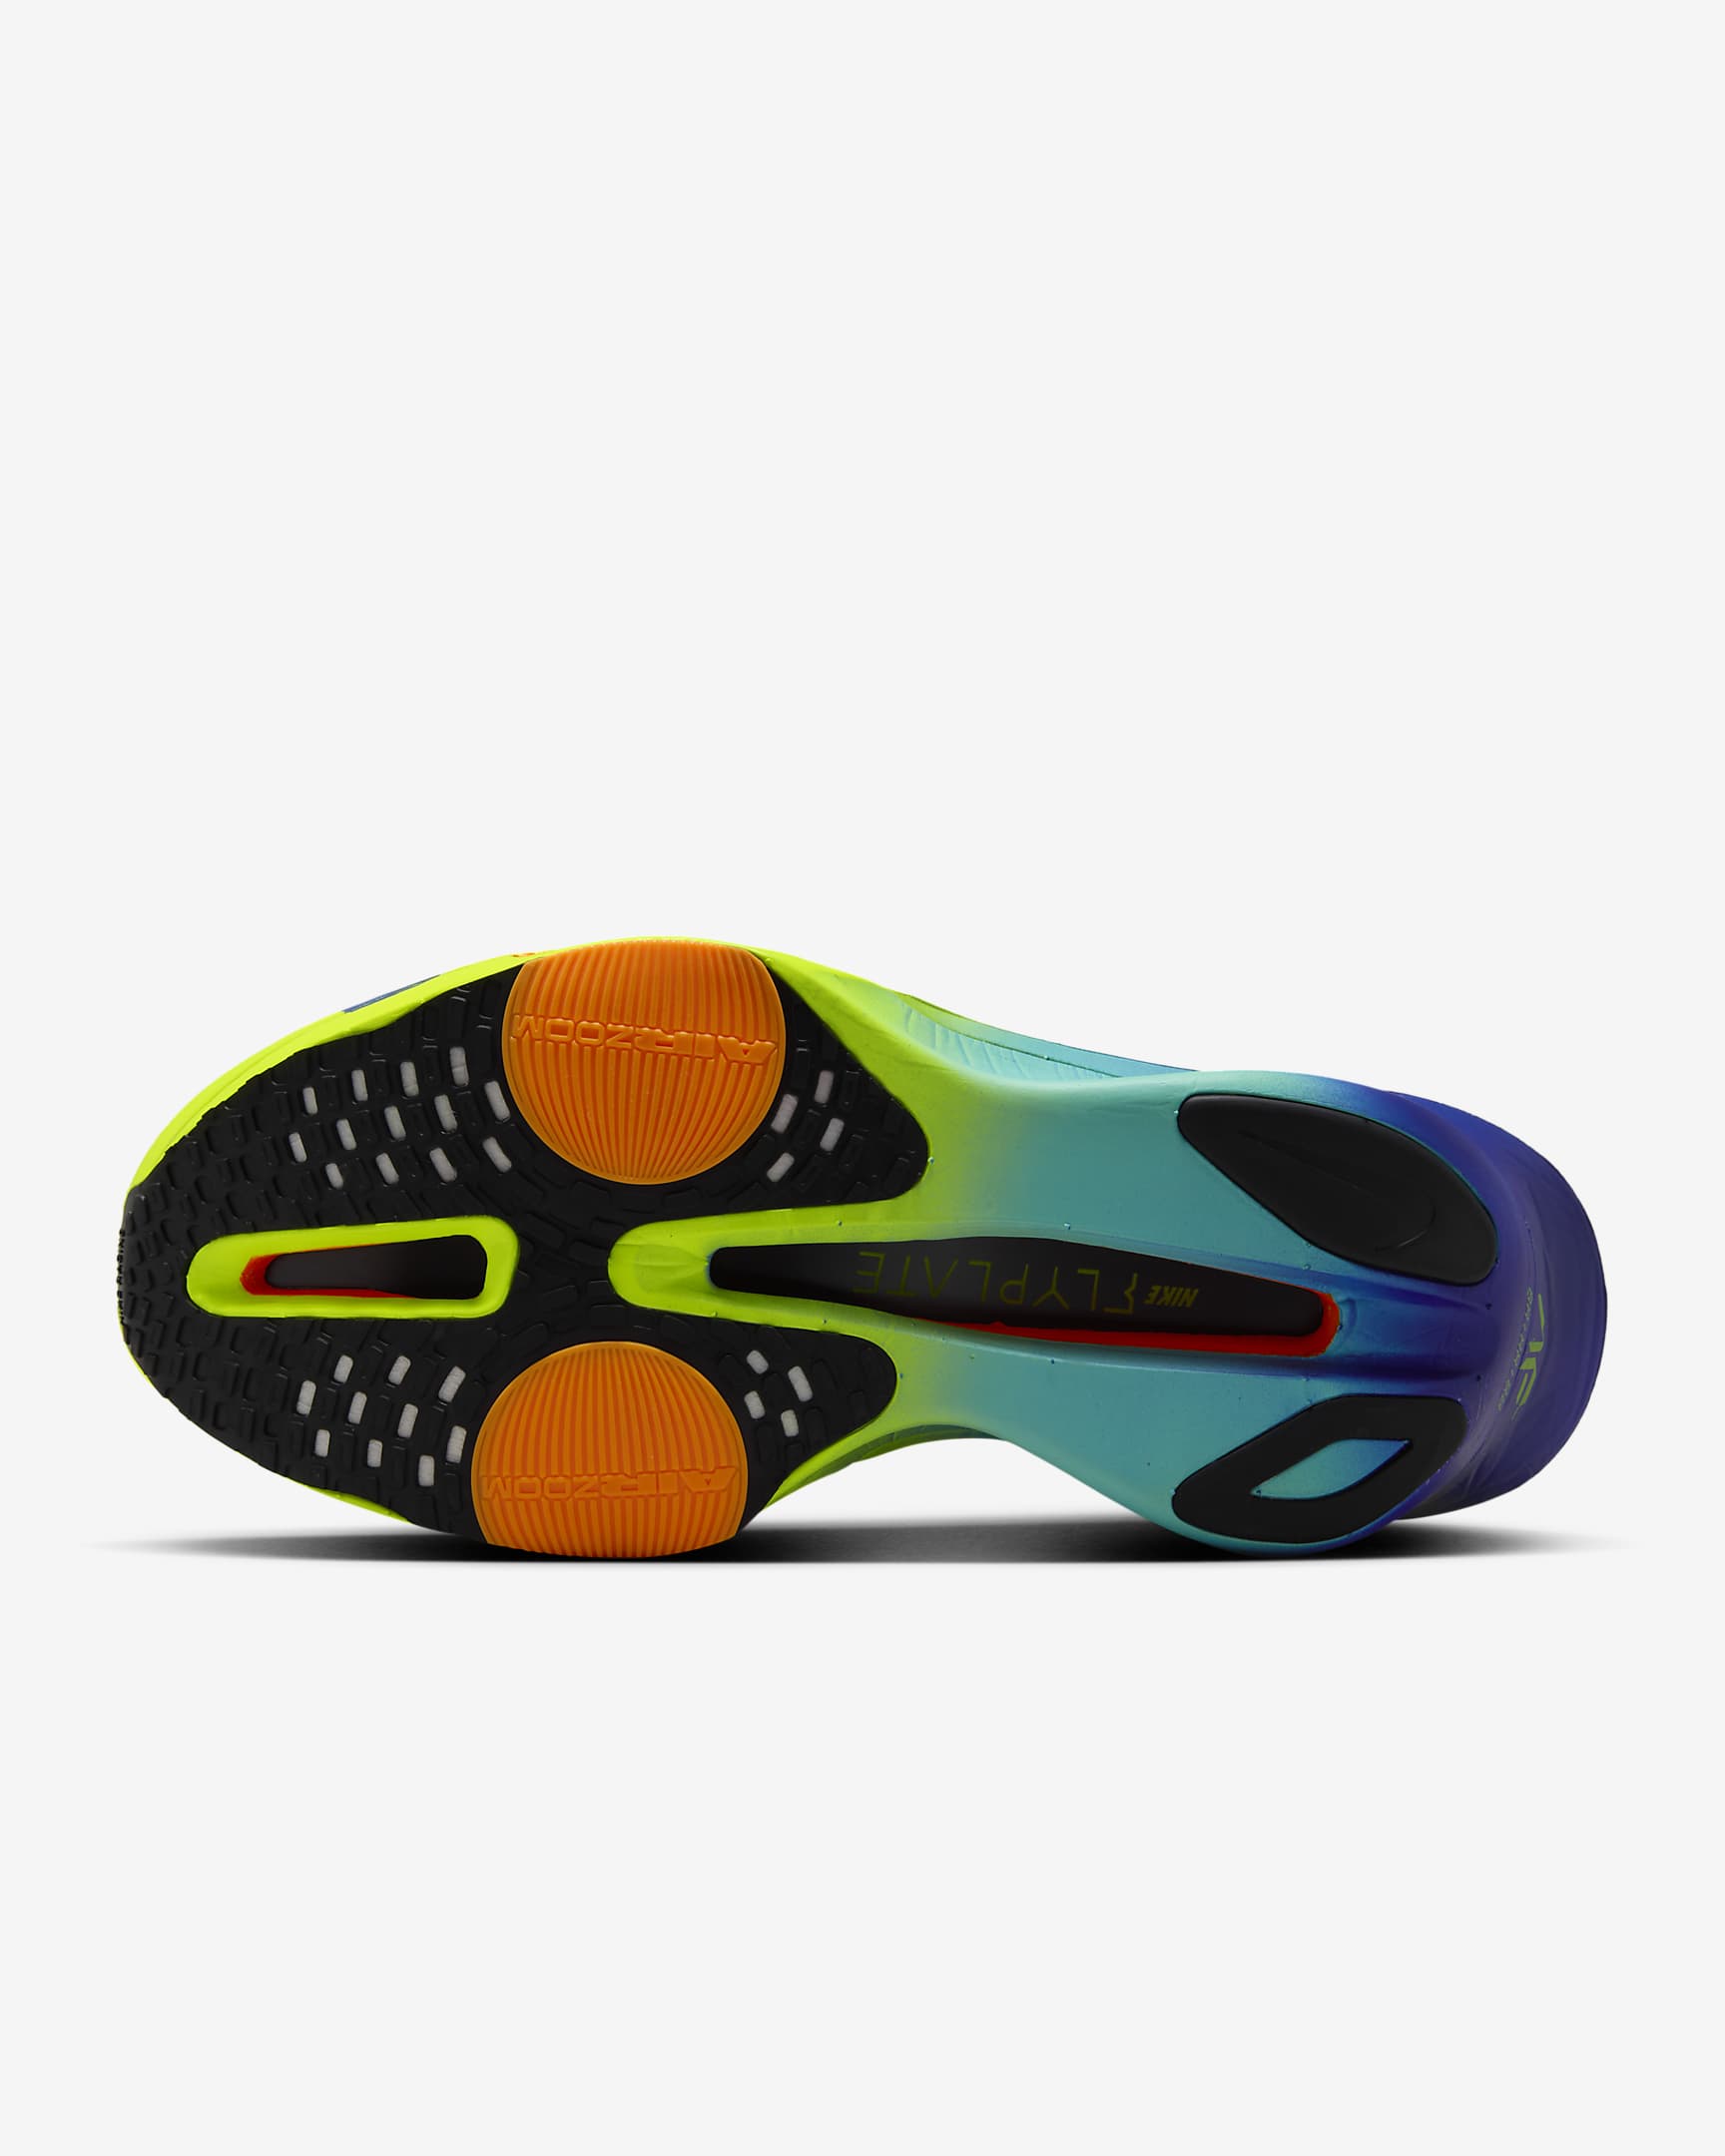 Nike Alphafly 3 Women's Road Racing Shoes - Volt/Dusty Cactus/Total Orange/Concord